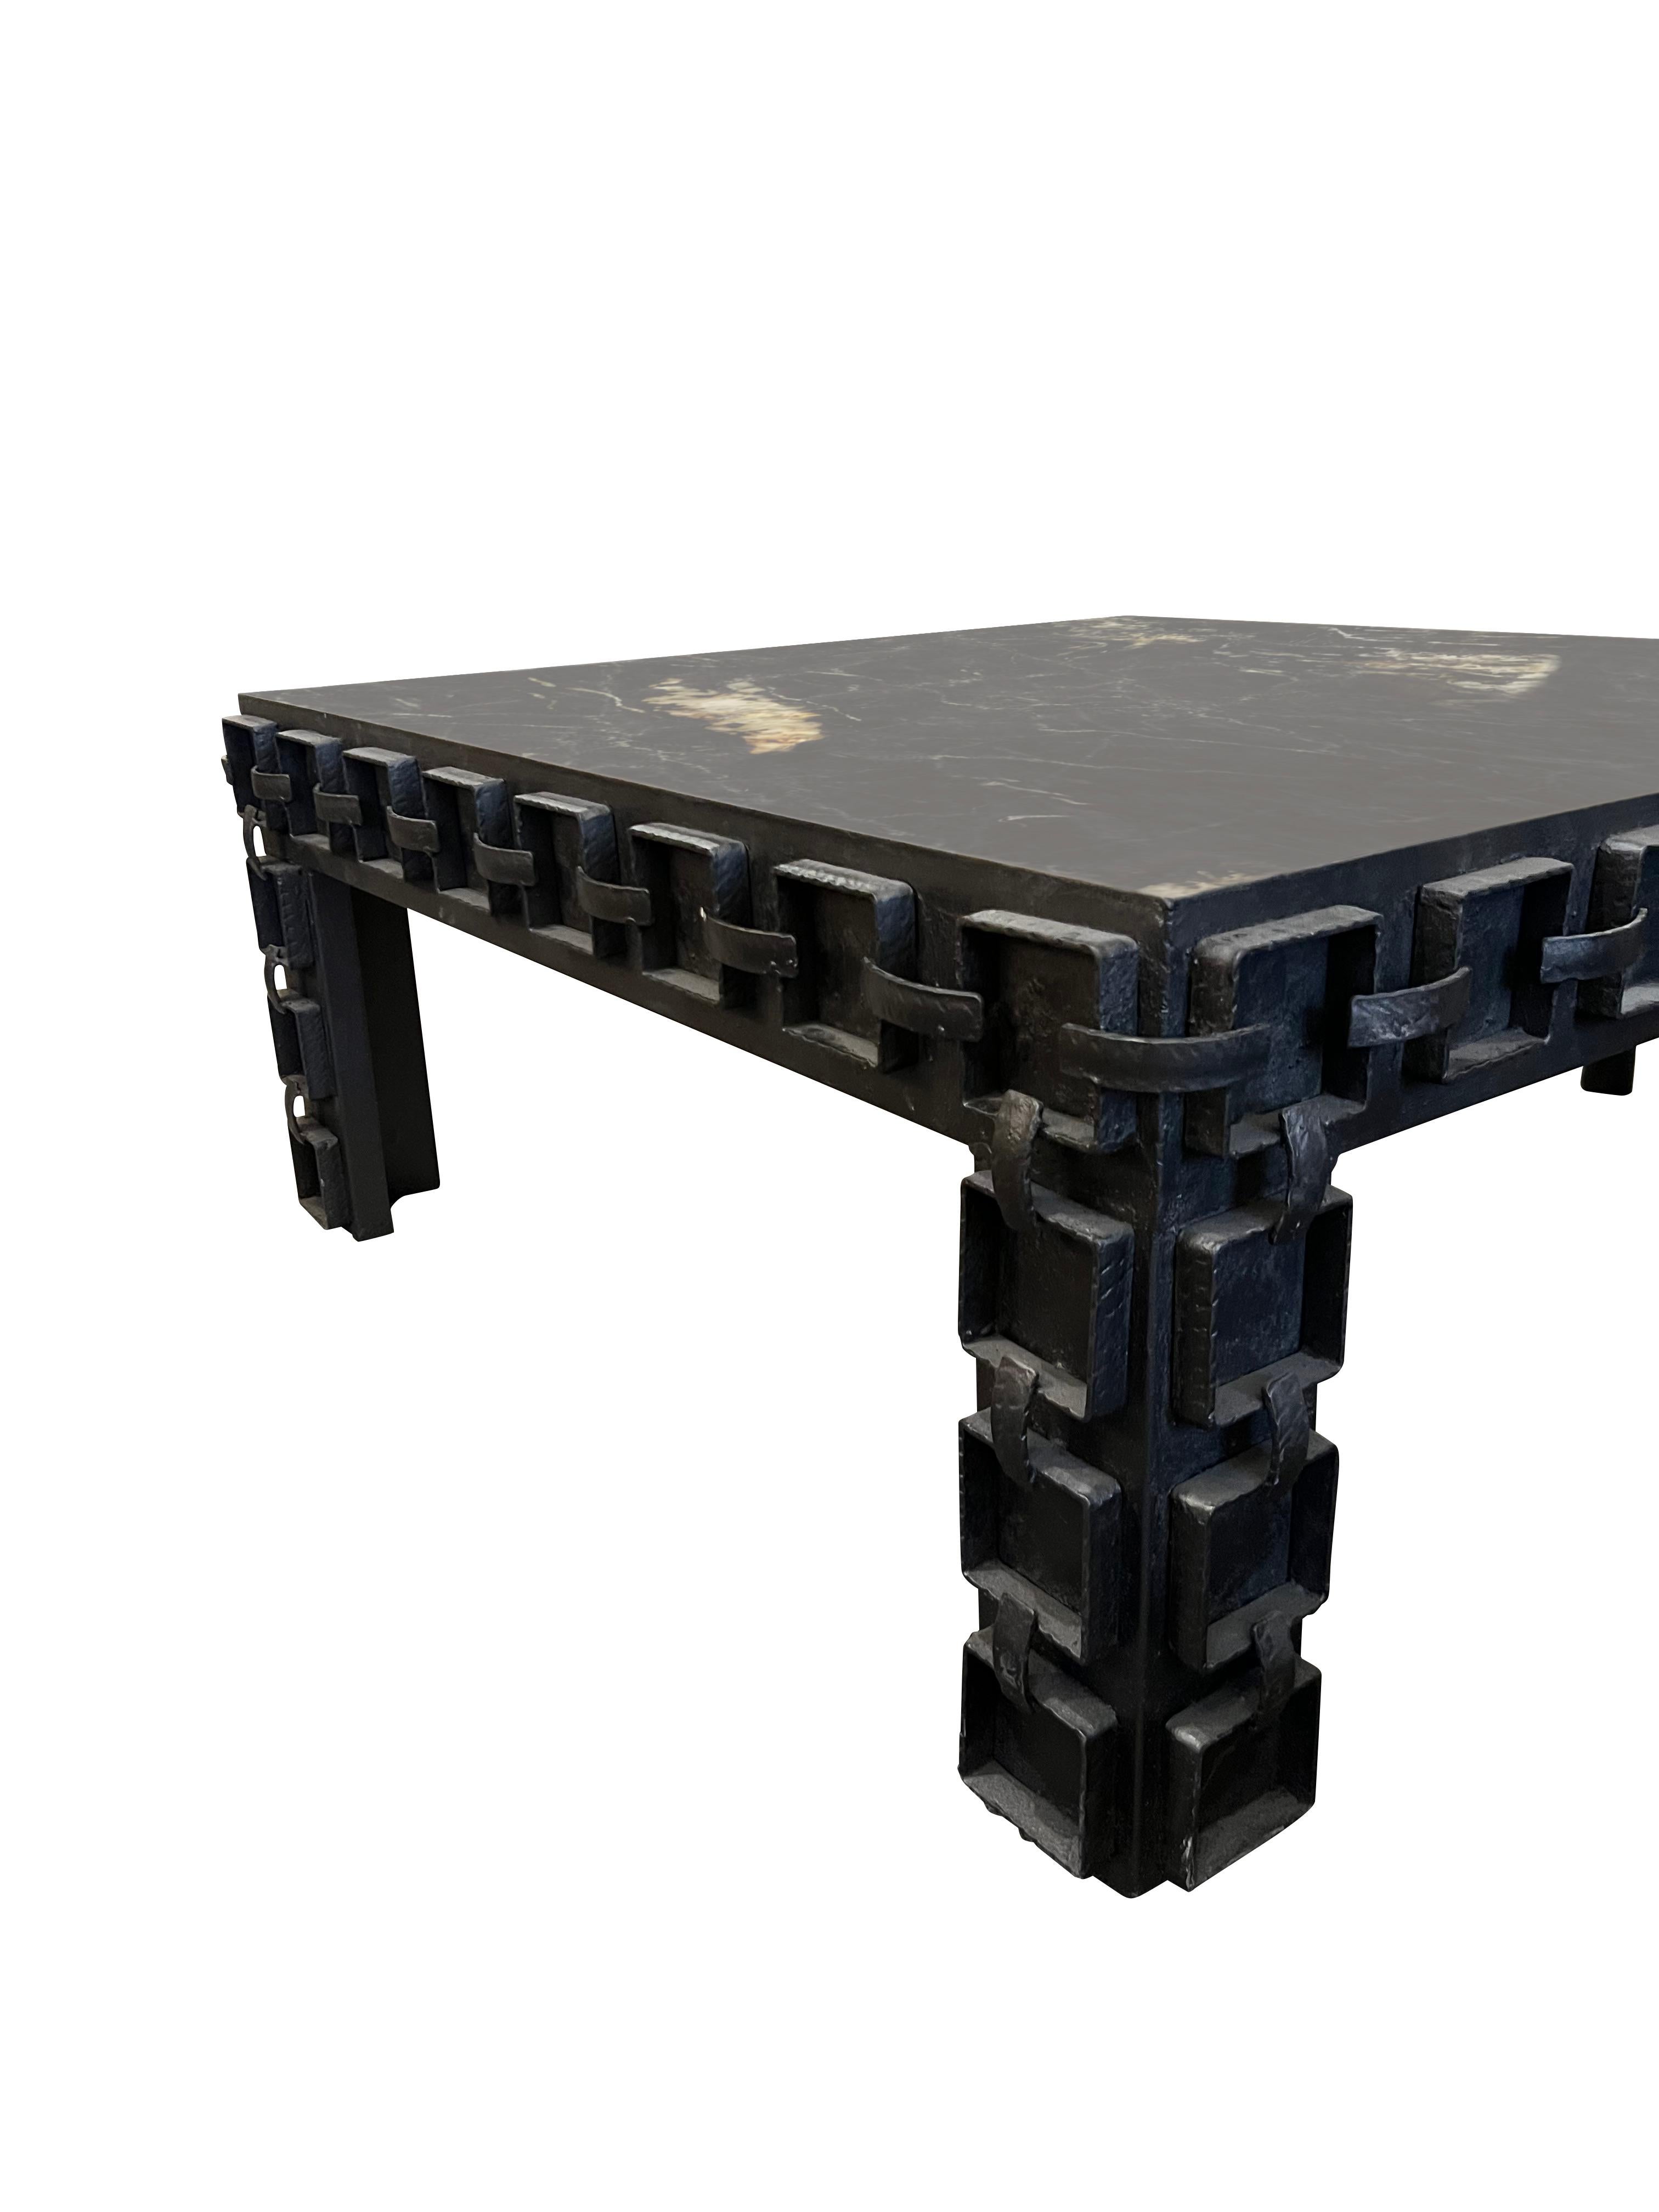 1960's Spanish Brutalist design iron base coffee table.
Base has raised squares with iron strips creating a chain appearance.
New black with cream marble top with polished finish.